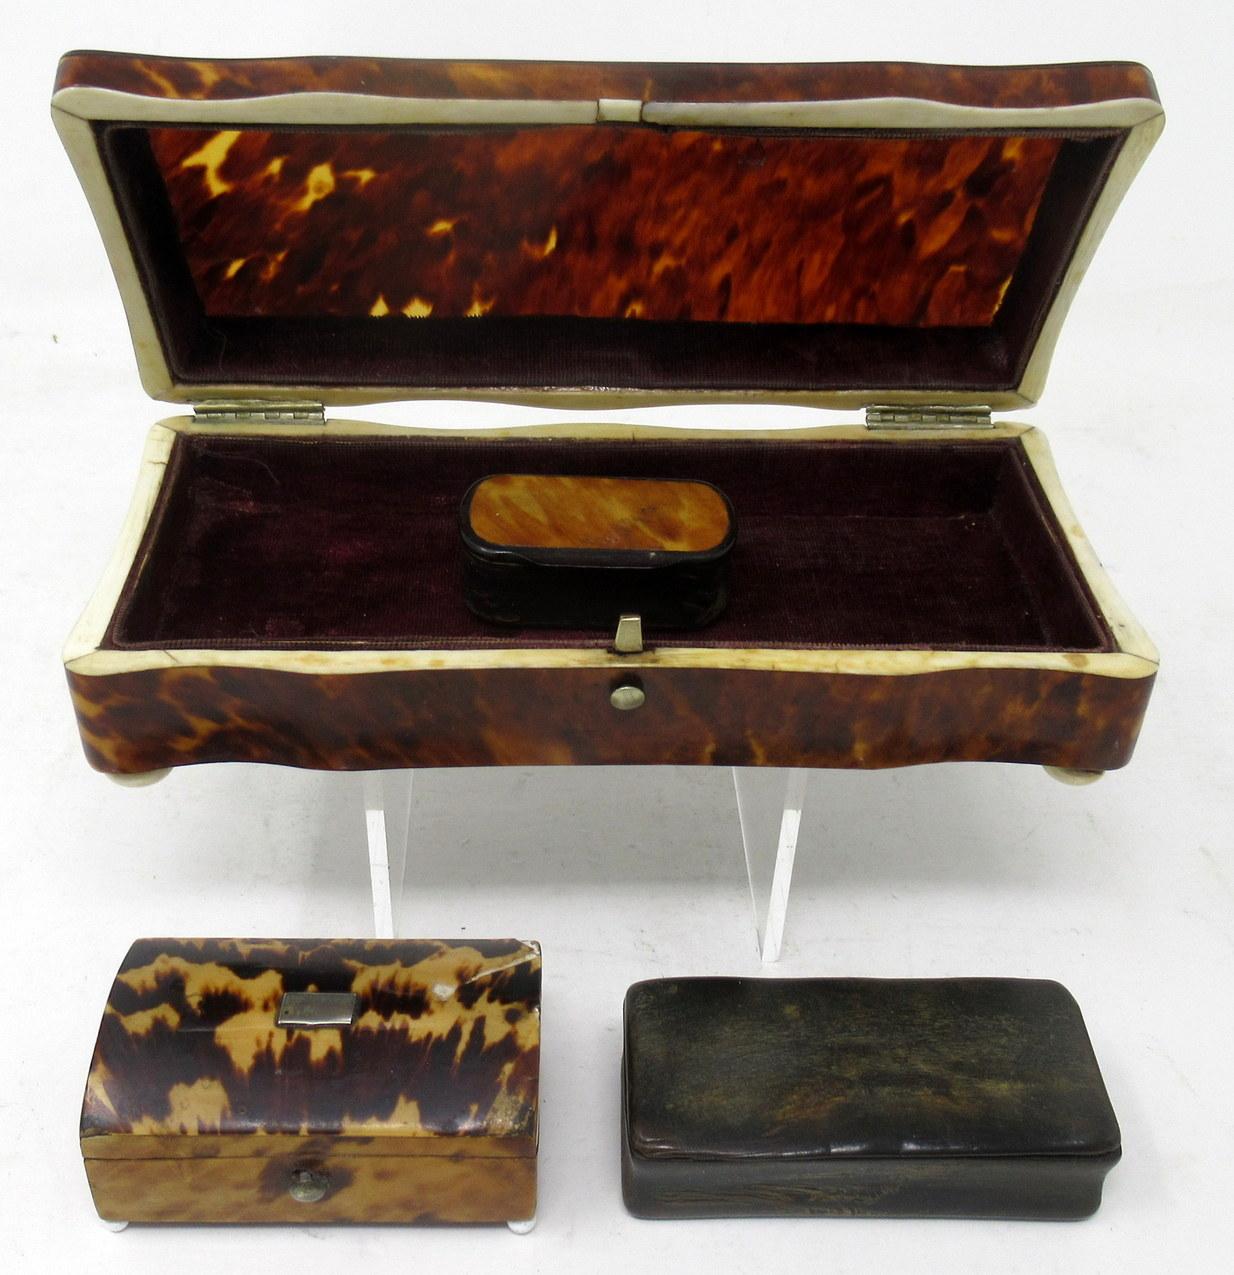 Stunning Example of a Ladies Well Figure Tortoise Shell Horn mounted Jewlery Casket of compact proportions, made during the last half of the Nineteenth Century. Slightly dome shaped rectangular hinged cover, the body is raised on four bun supports.